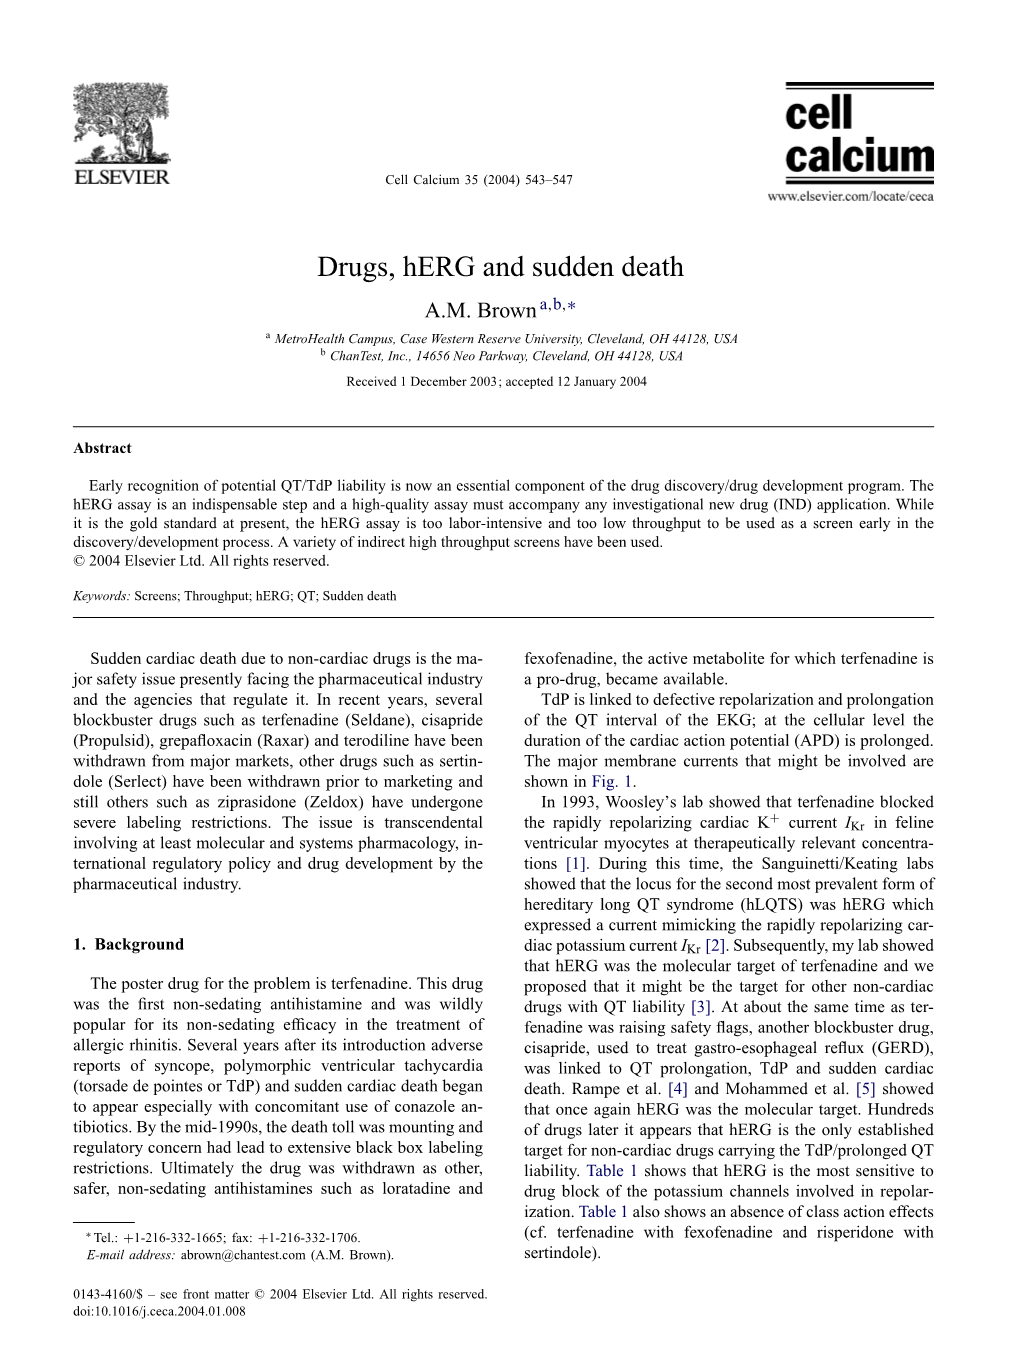 Drugs, Herg and Sudden Death A.M